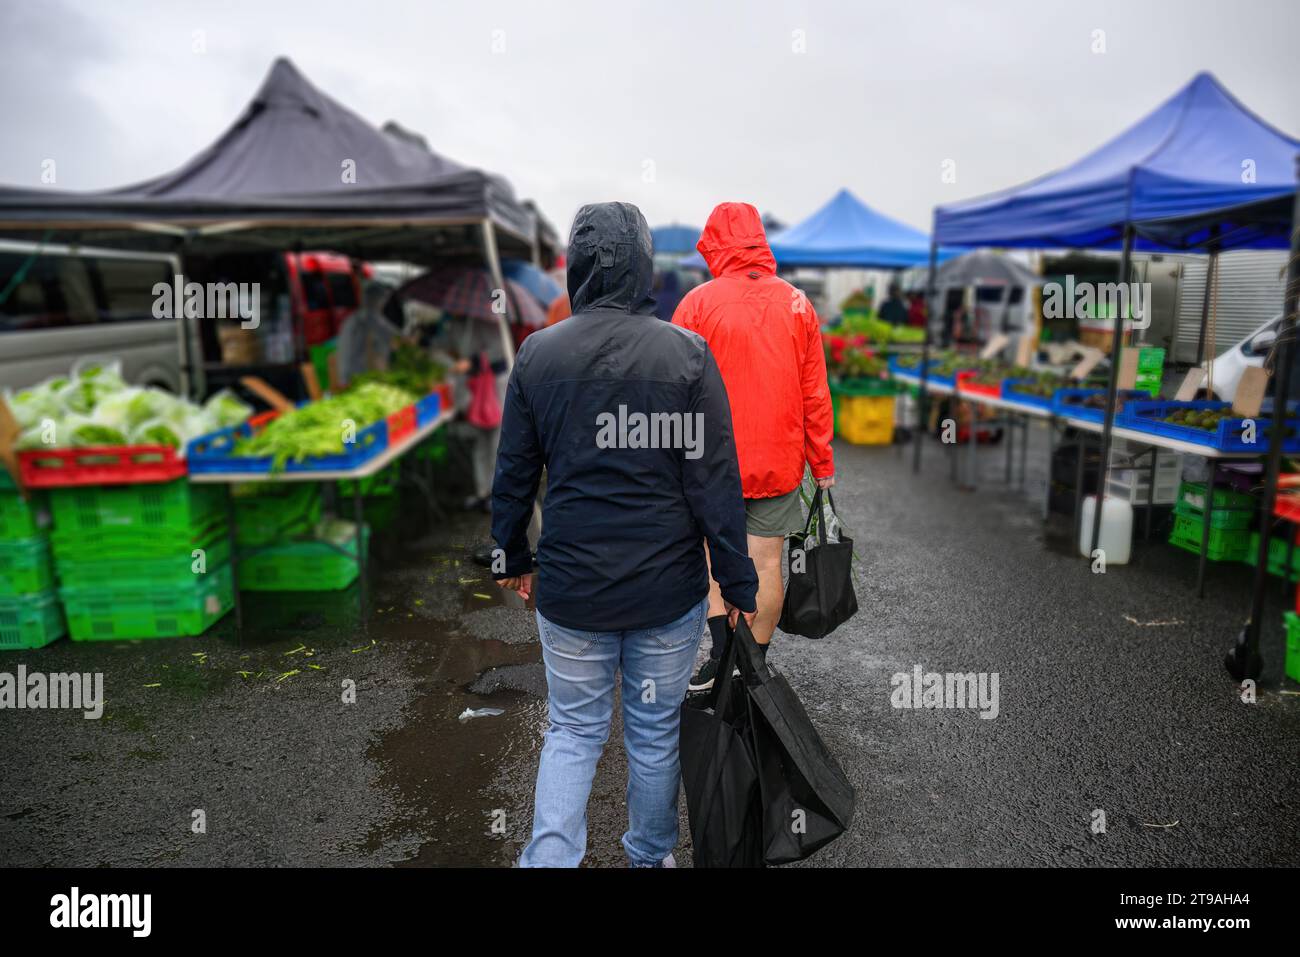 Couple shopping at the vegetable market in the rain. Stock Photo